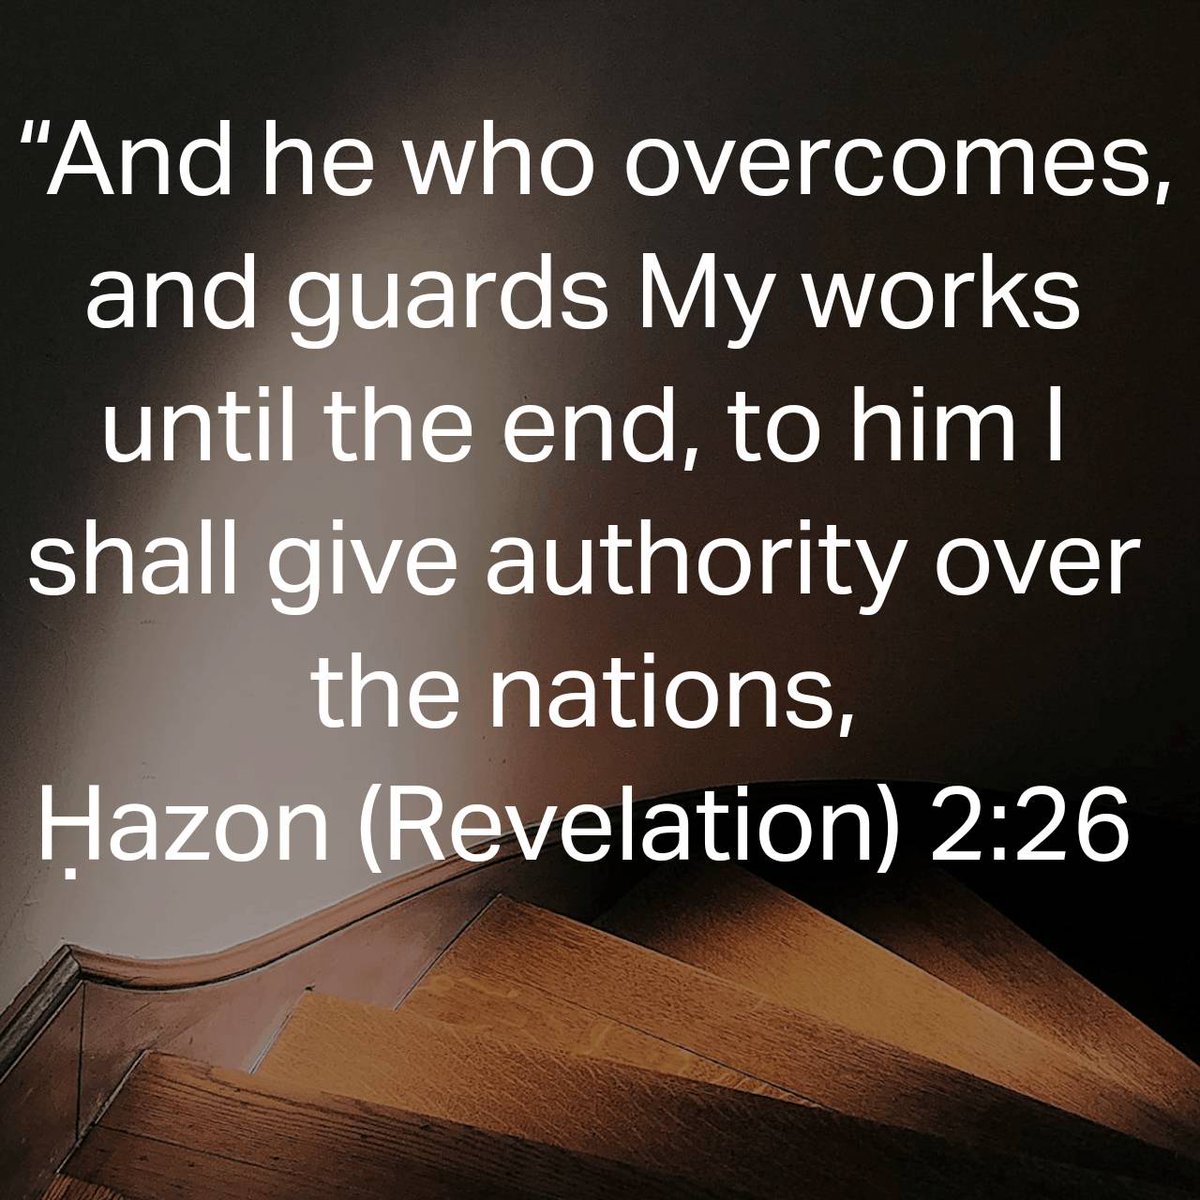 Ḥazon (Revelation) 2:26 
[26] “And he who overcomes, and guards My works until the end, to him I shall give authority over the nations,